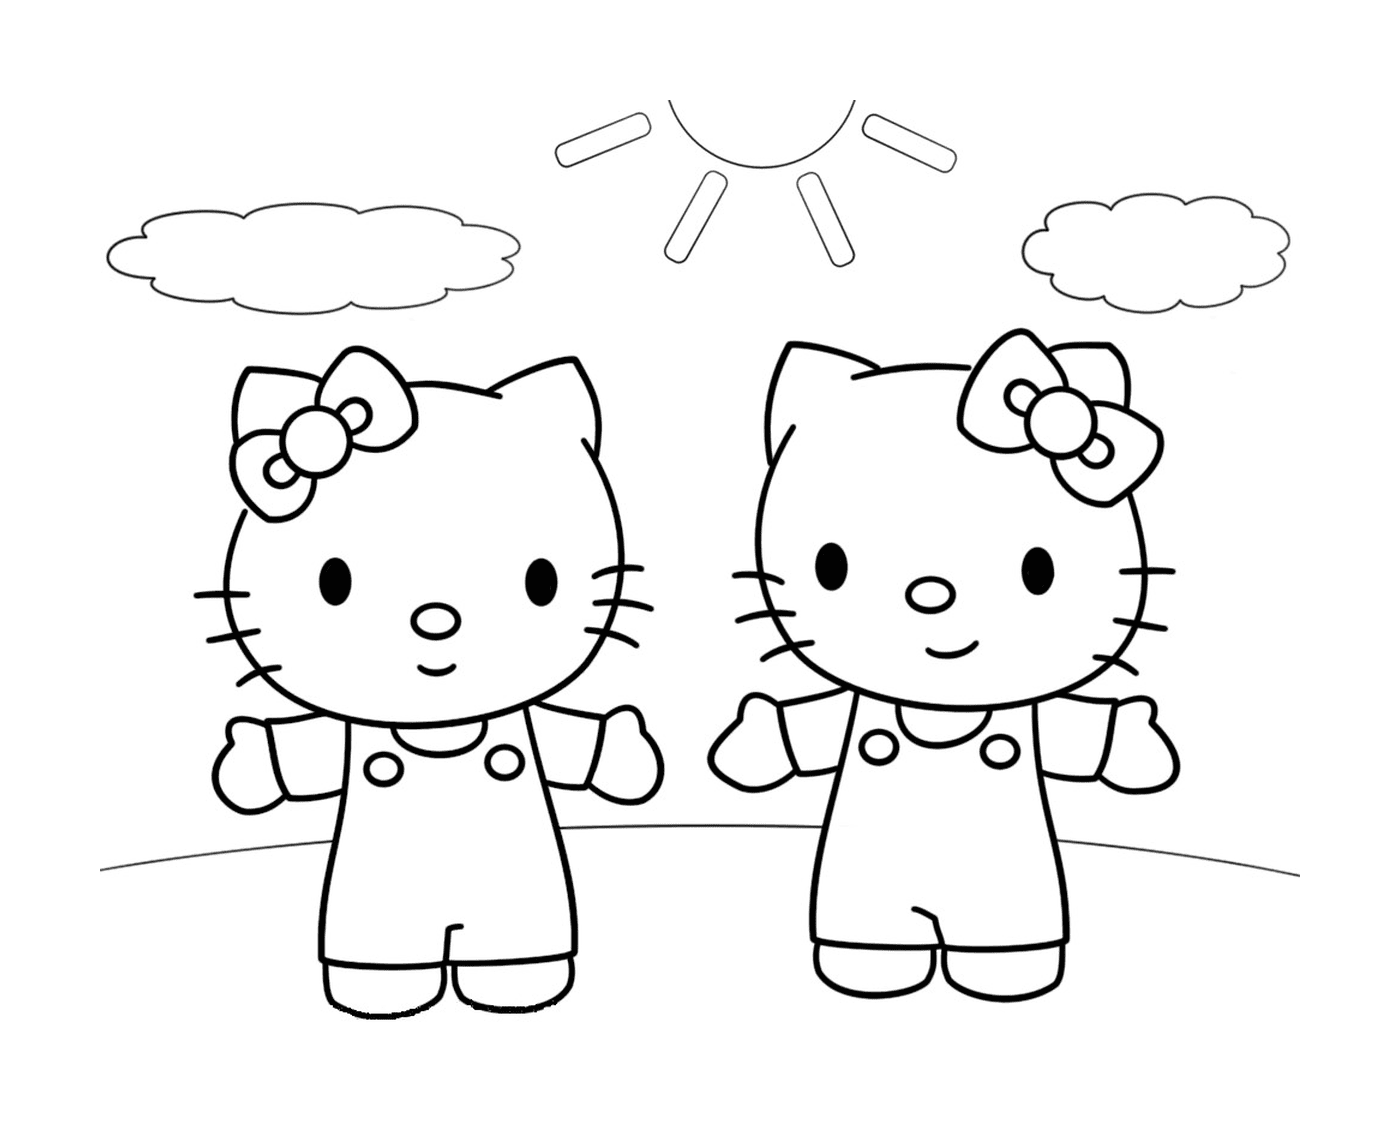  Two Hello Kitty side by side 